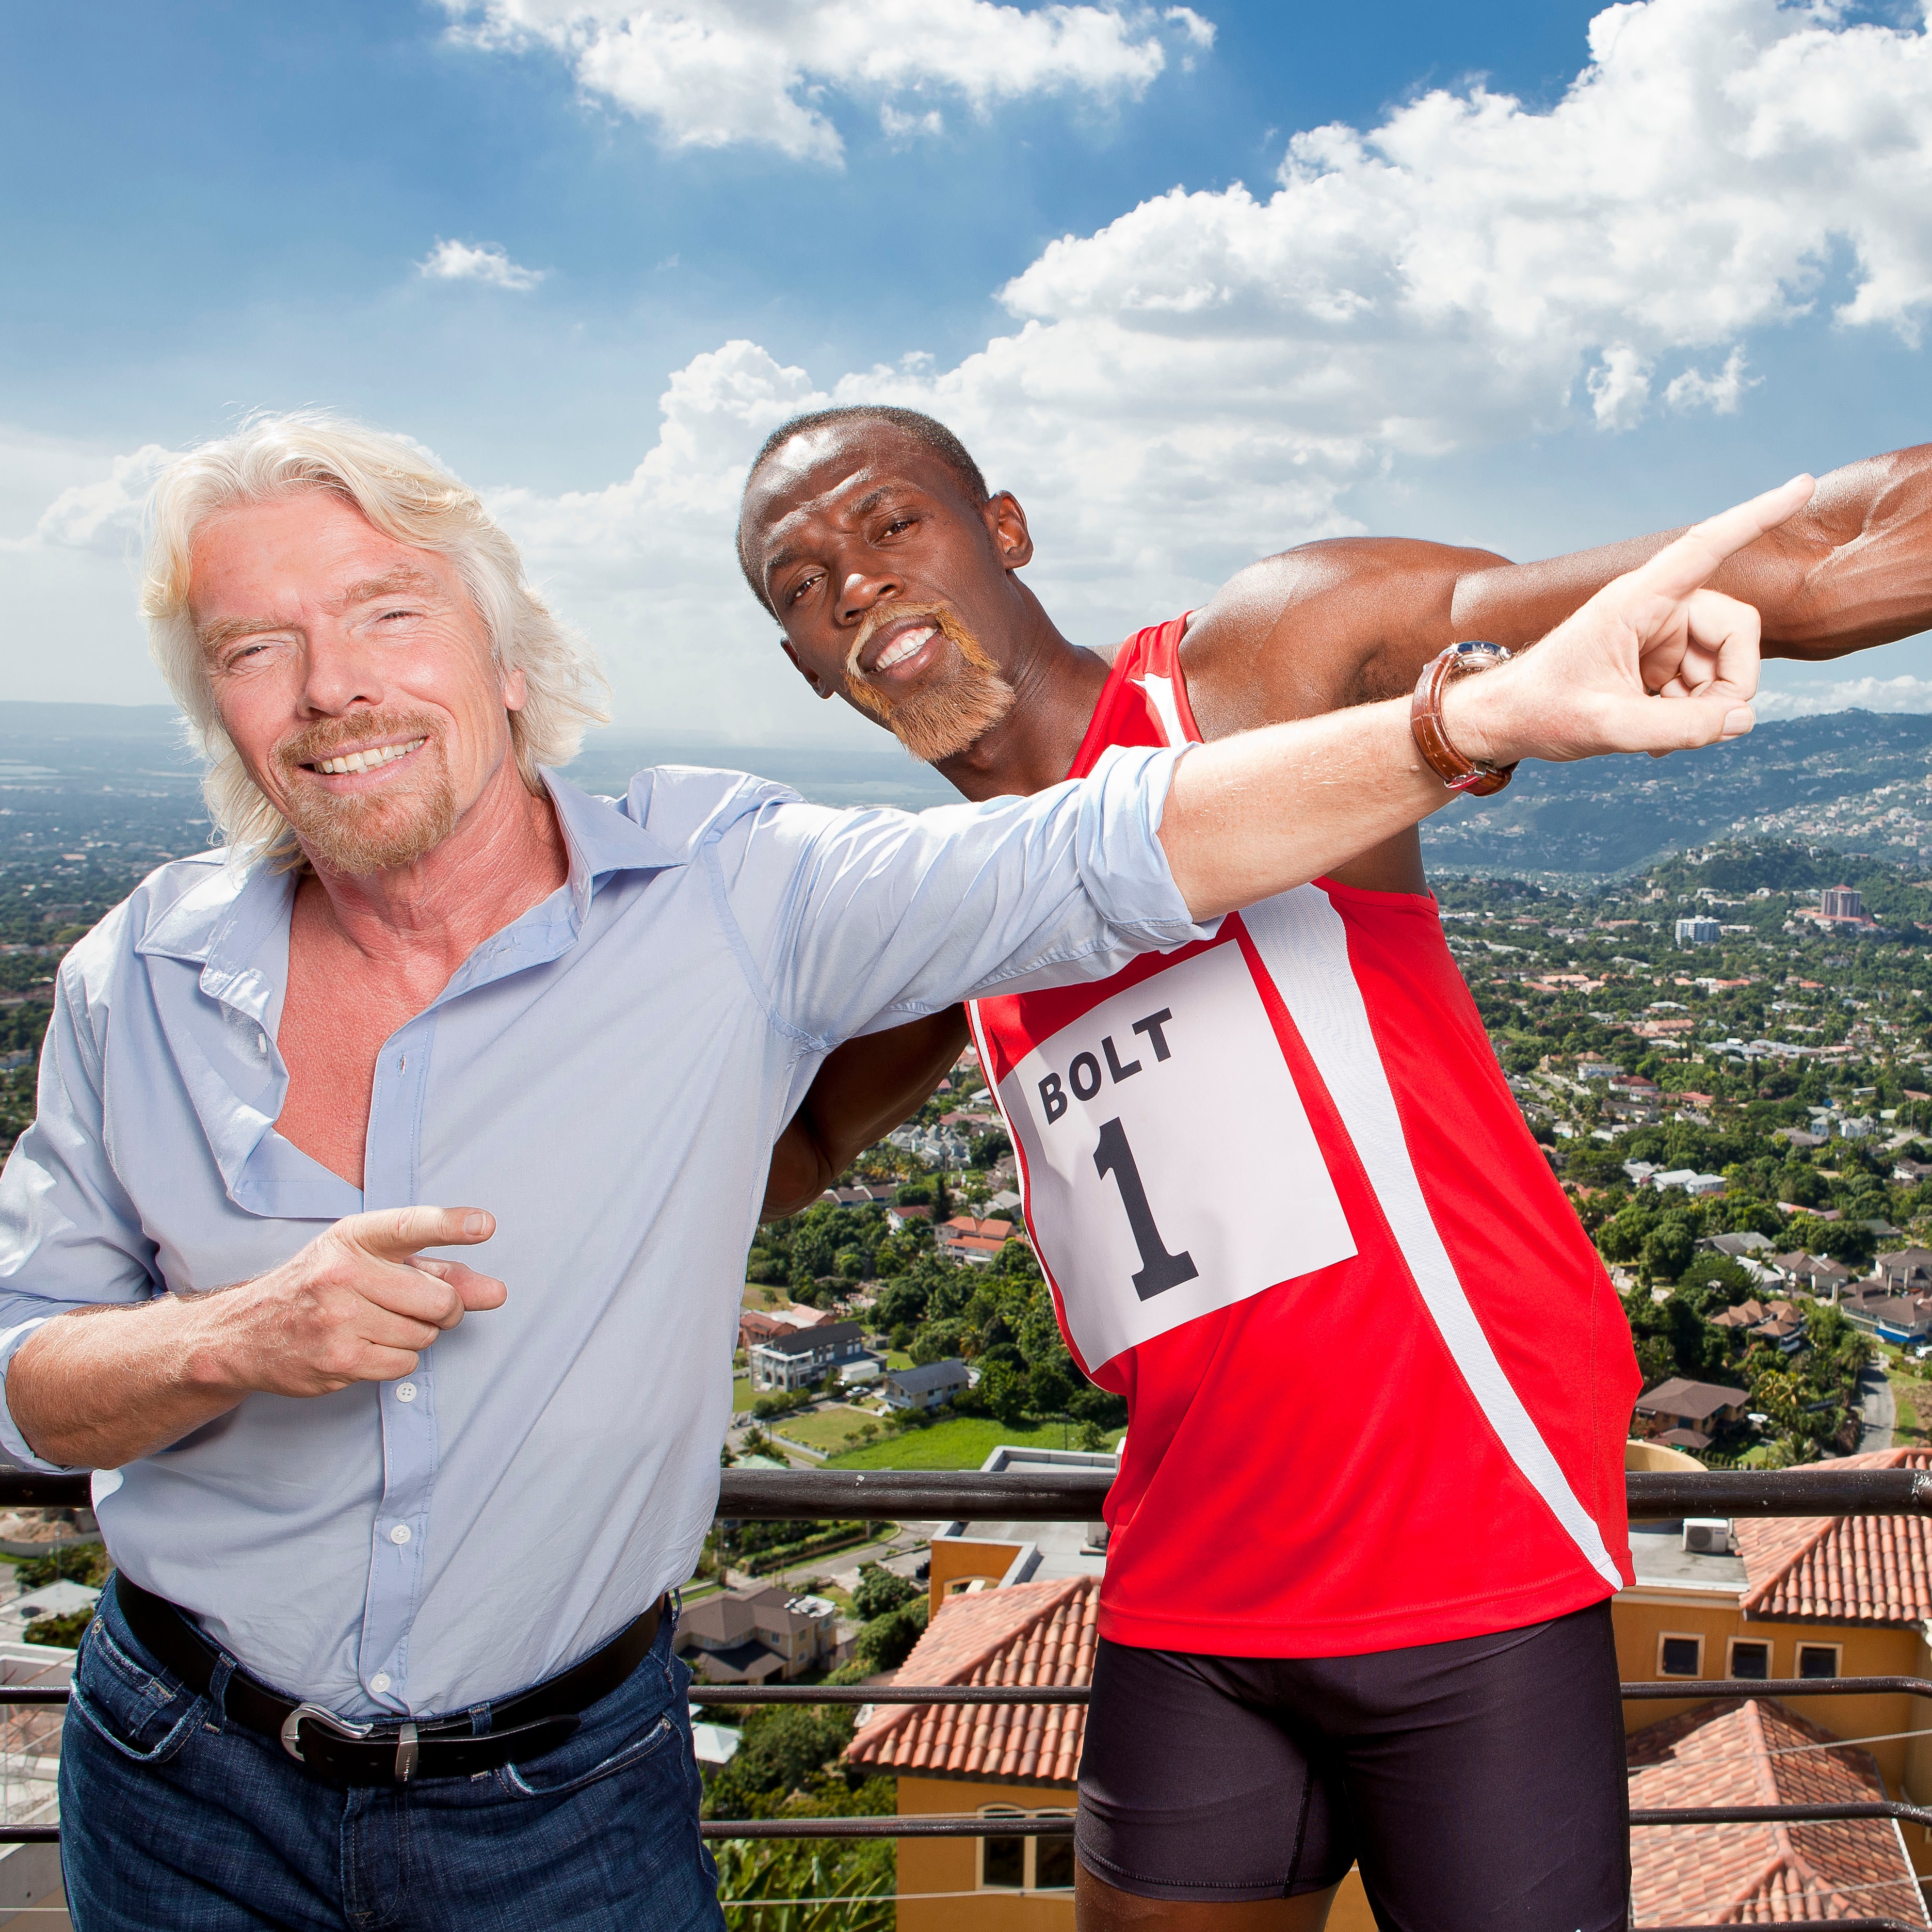 Richard Branson and Usain Bolt smile and pose together